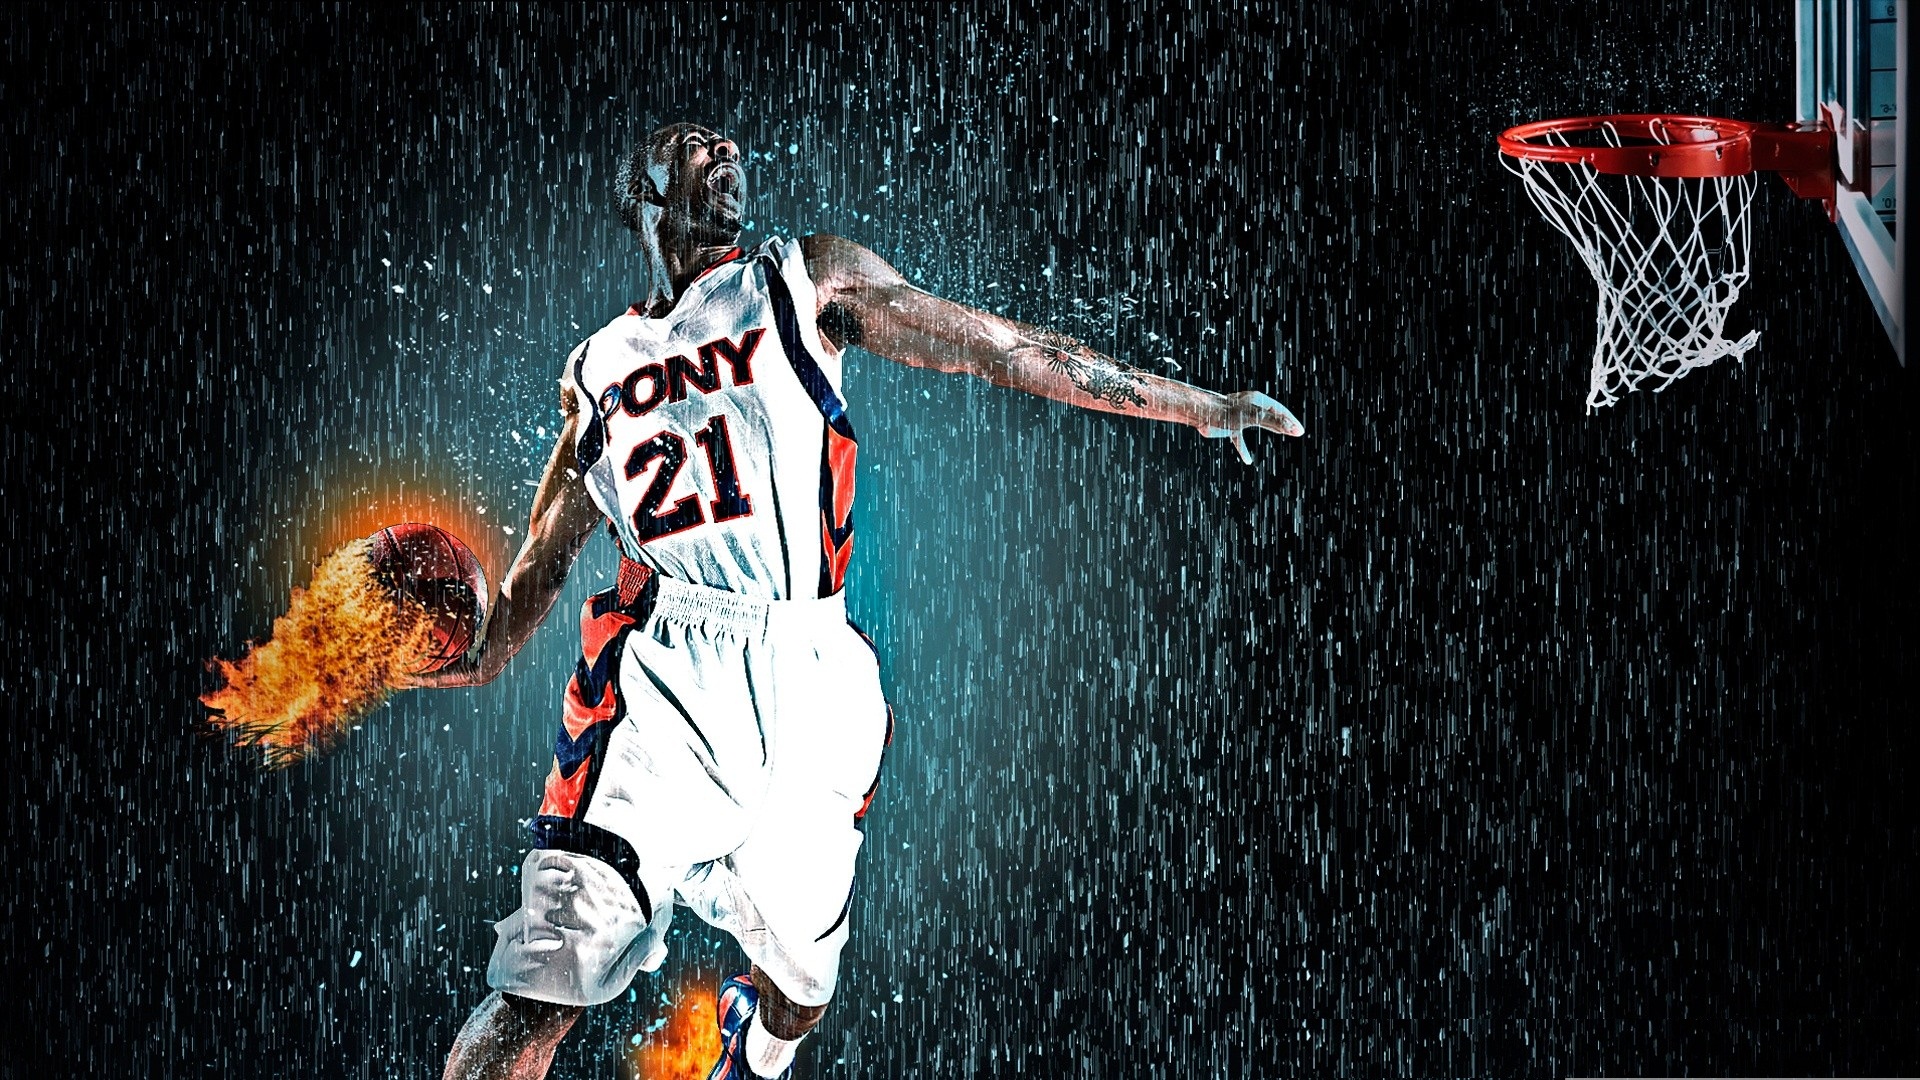 Basketball Backgrounds HD with image dimensions 1920x1080 pixel. You can make this wallpaper for your Desktop Computer Backgrounds, Windows or Mac Screensavers, iPhone Lock screen, Tablet or Android and another Mobile Phone device